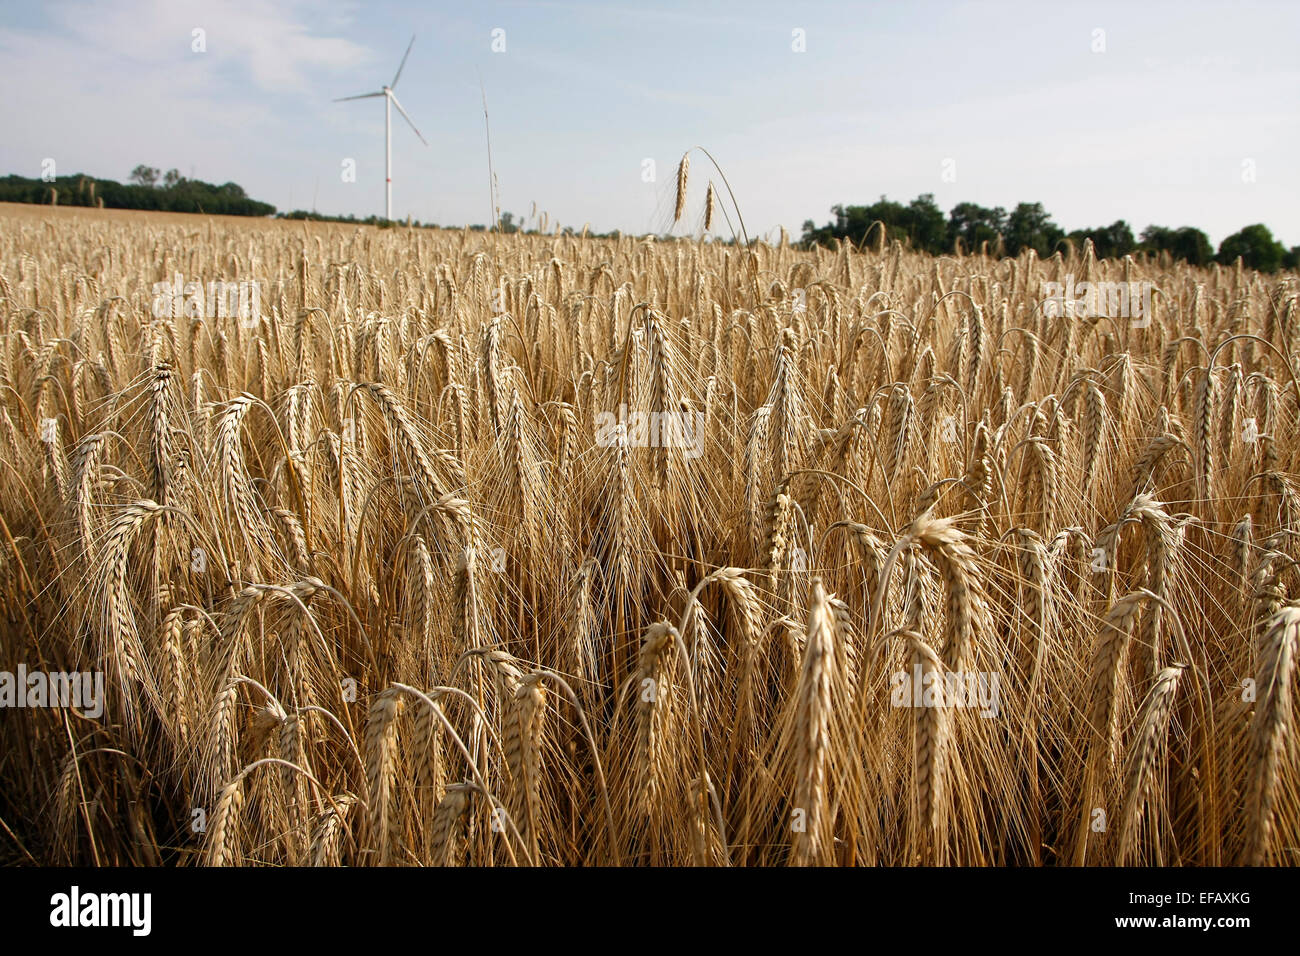 A field of ripe rye. The rye is usually harvested by combine harvesters. Rye bread is an important indigenous crops. Rye flour can be use practically with all baked goods and many other dishes. Photo: Klaus Nowottnick Date: August 2, 2014 Stock Photo